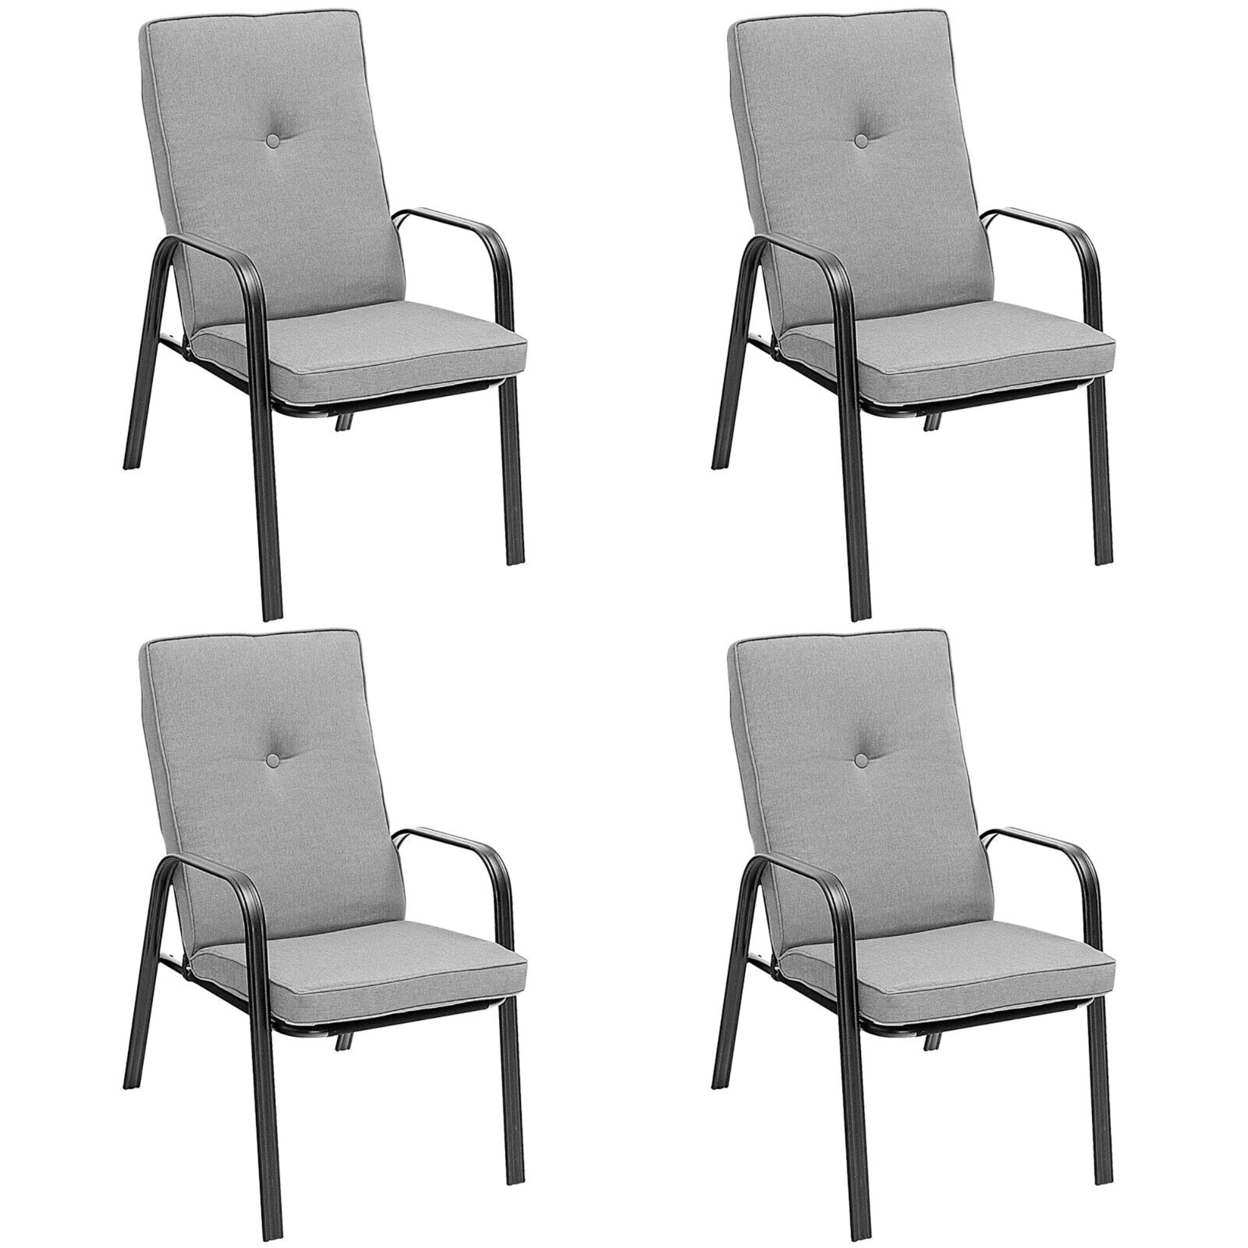 Set Of 4 Patio Dining Stackable Chairs High-Back Cushions Space Saving